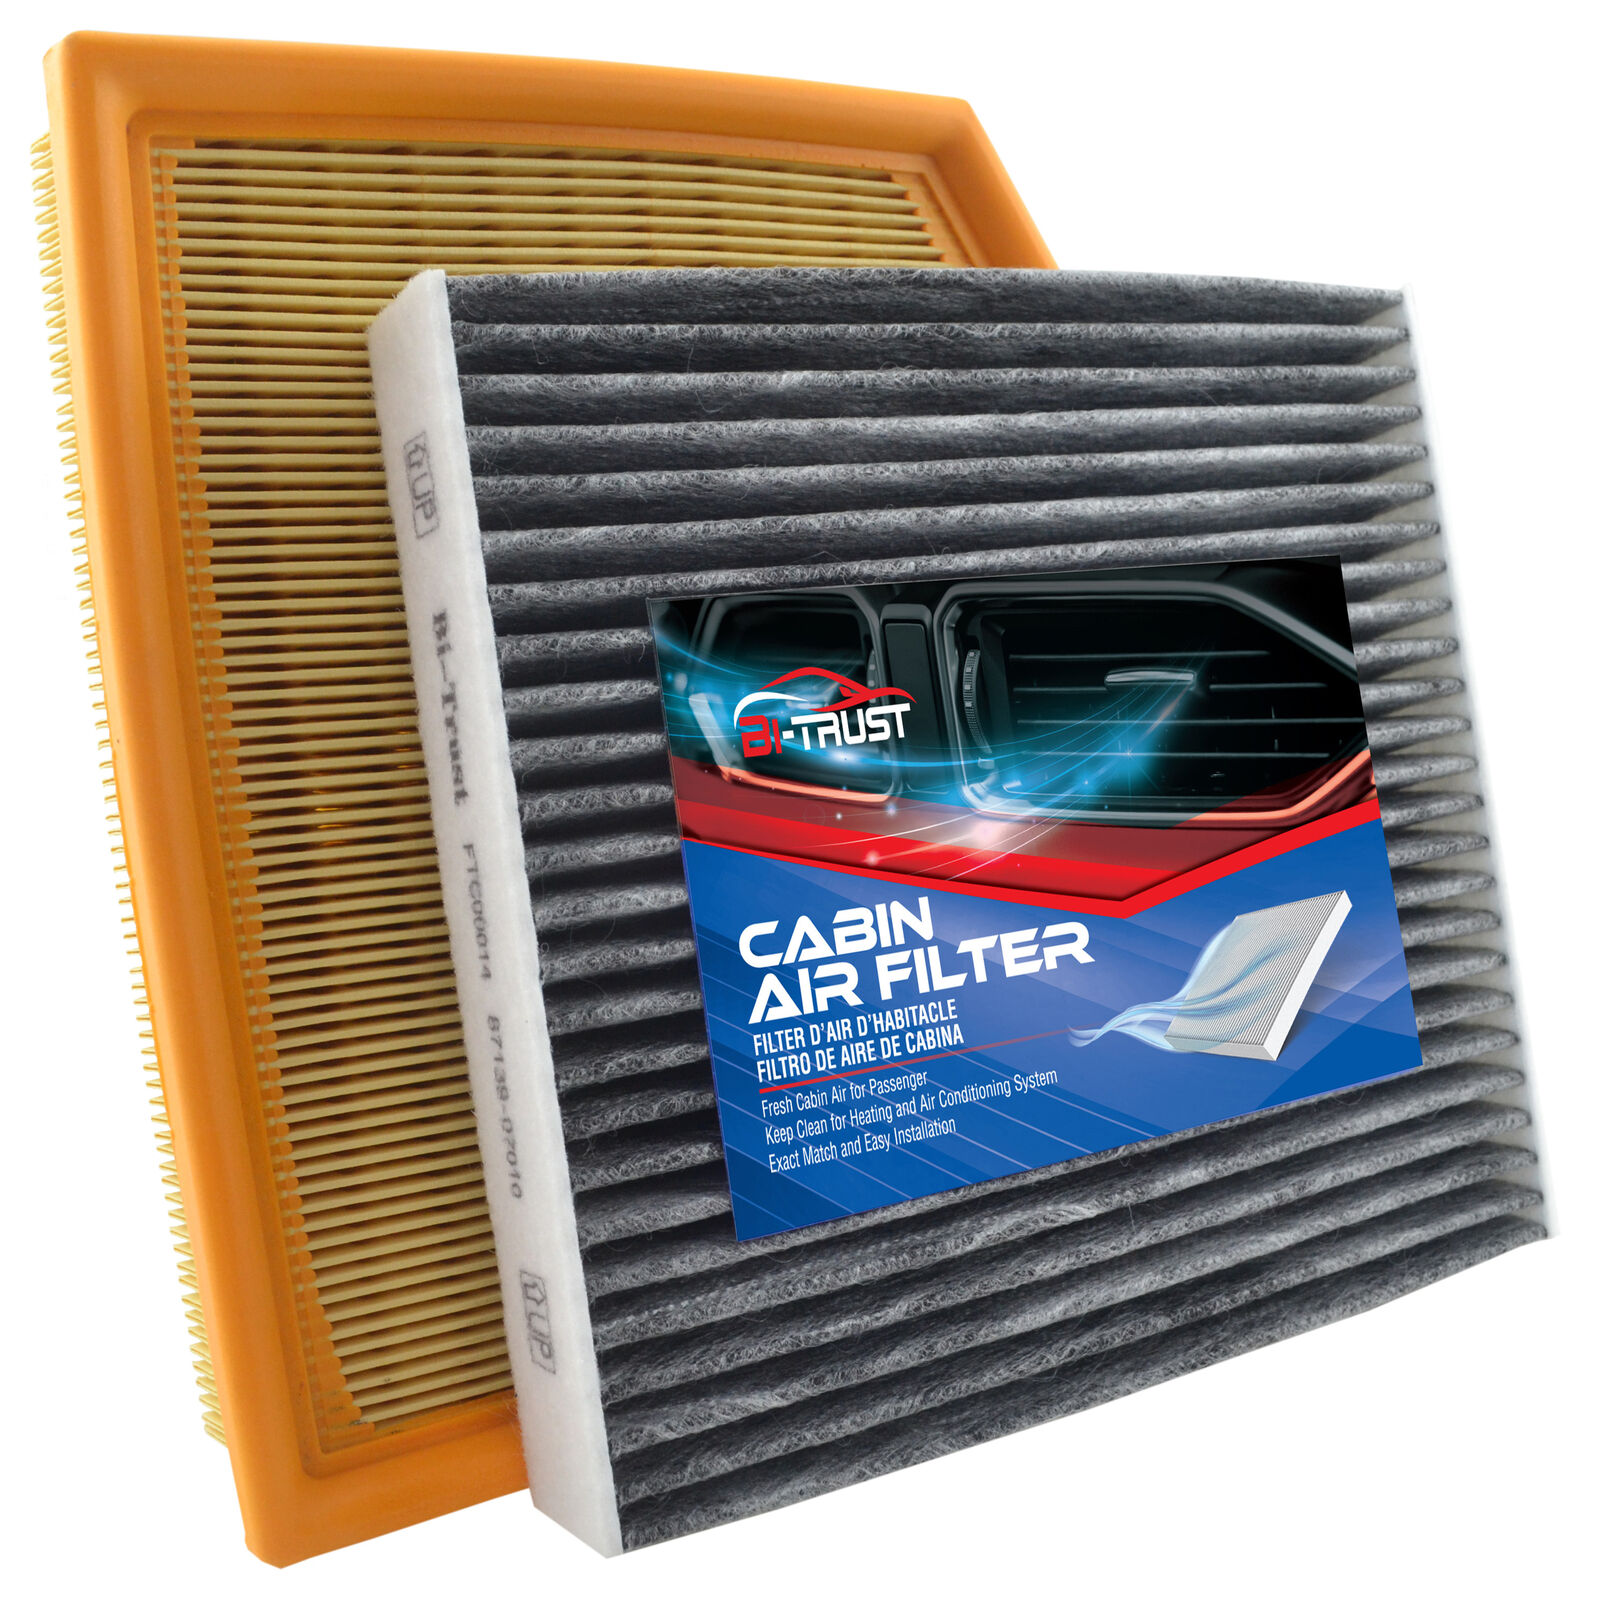 Engine & Cabin Air Filter for RC350 RC300 RC200T IS350 IS300 IS250 IS200T GS450H